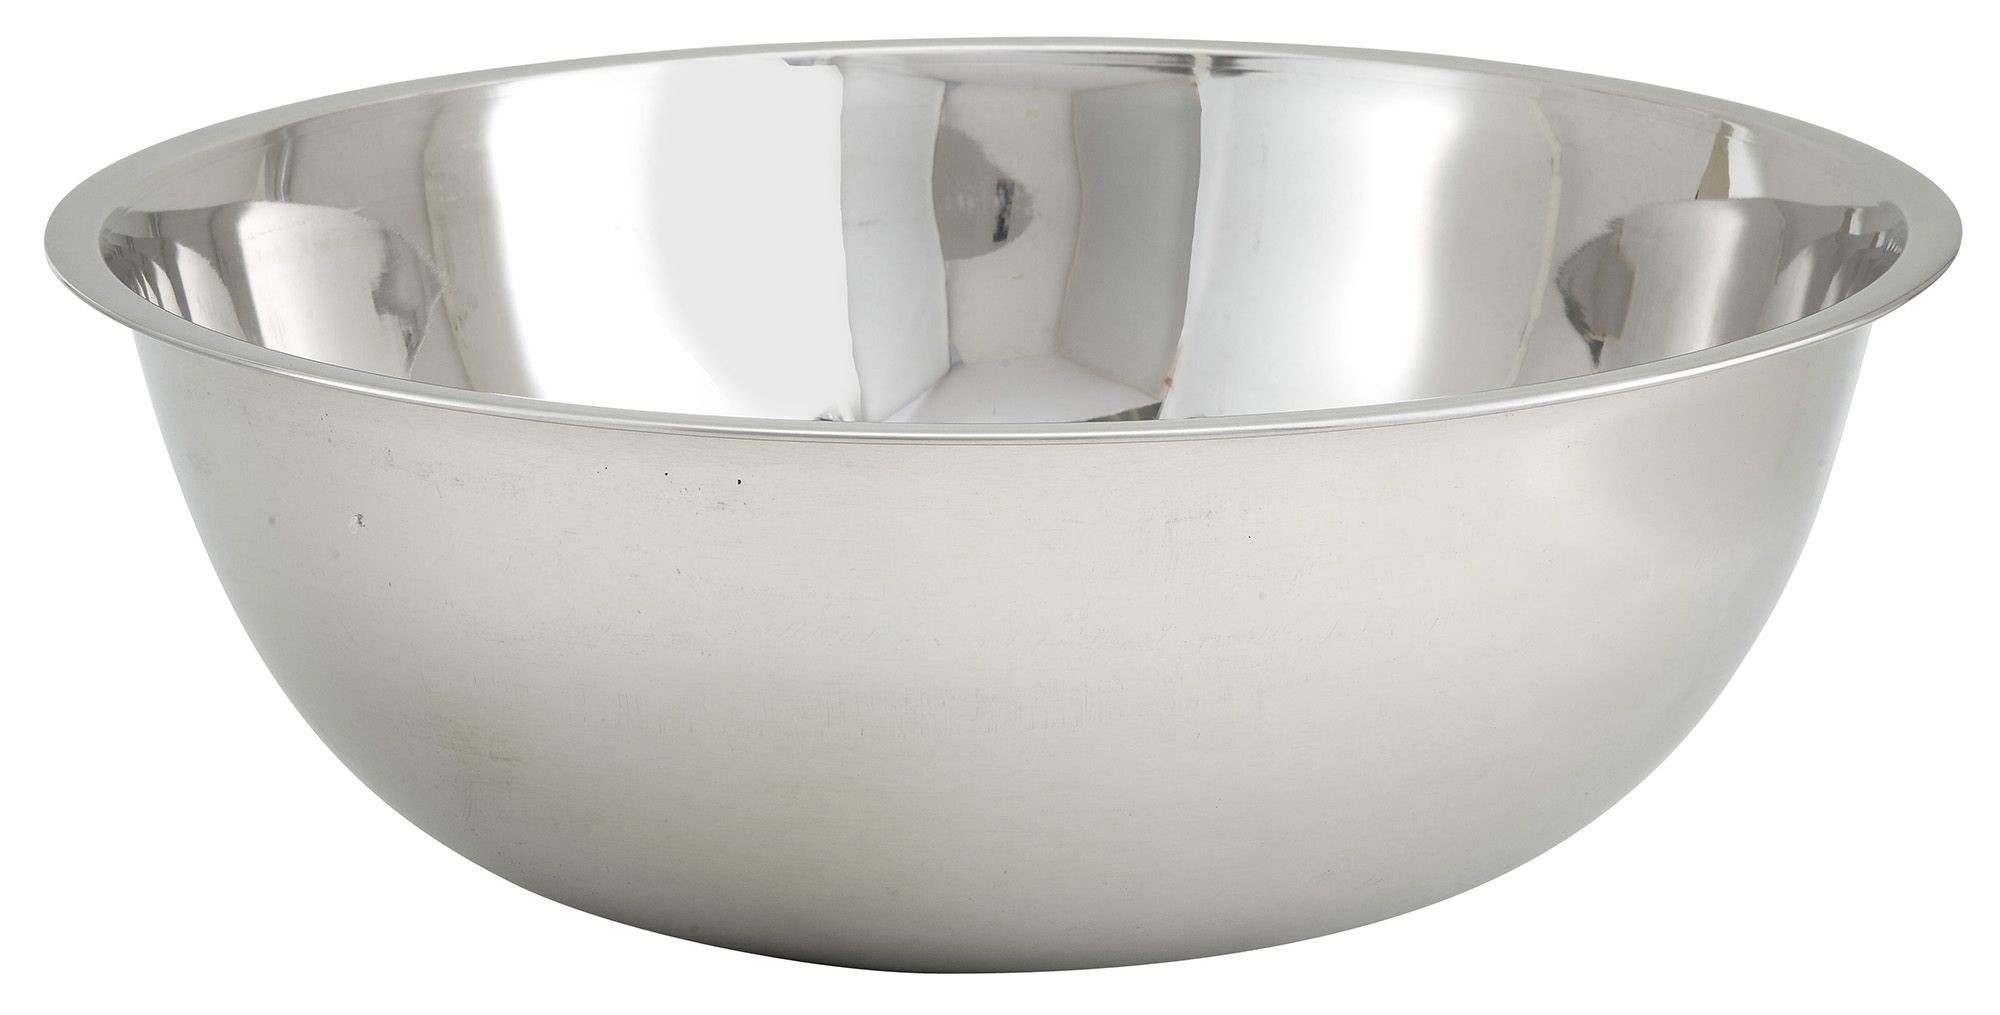 Winco MXBT-2000Q Stainless Steel All-Purpose Mixing Bowl 20 Qt.